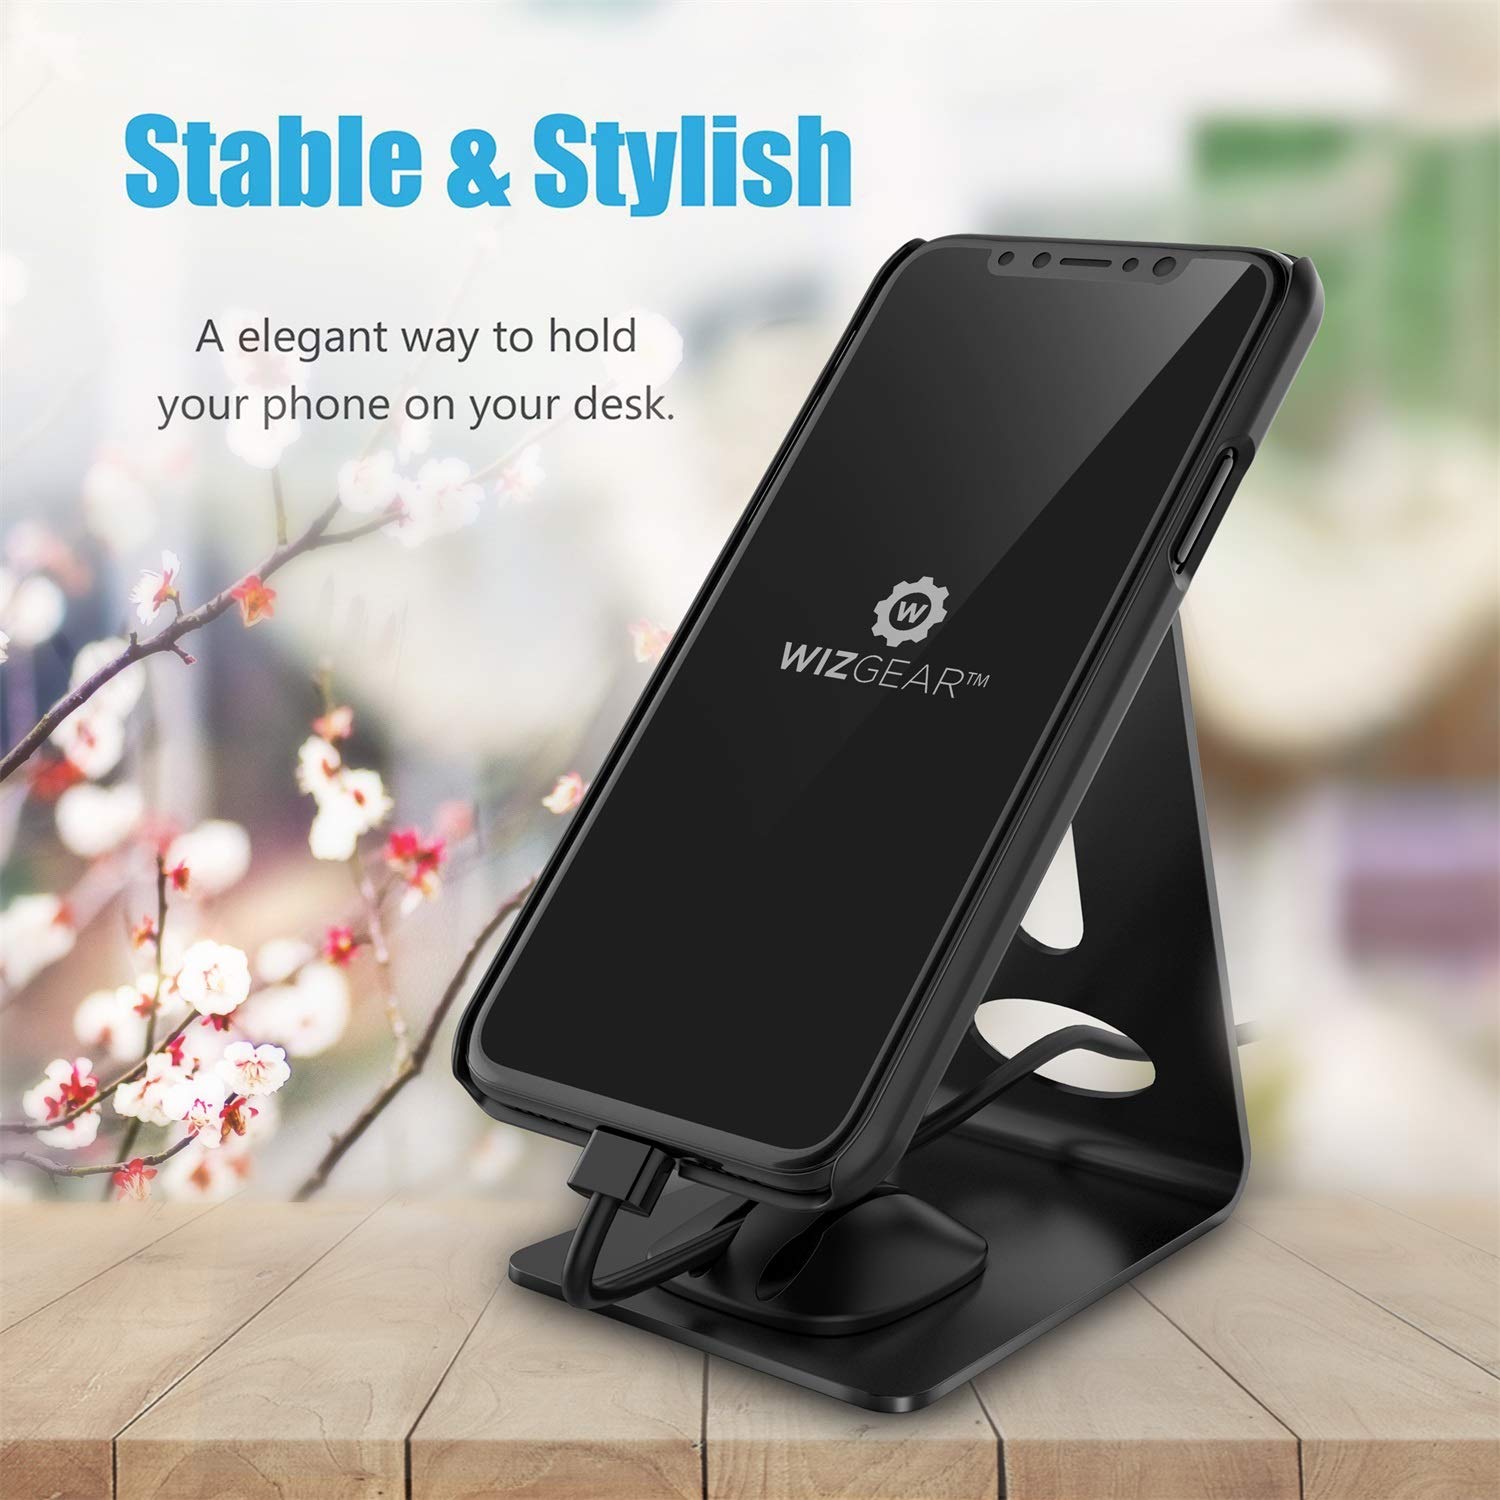 Wixgear Premium Phone Holder for iPhones, Cell Magnetic Phone Stand, Android Smartphones & Mini Tablets -Sturdy Metal Phone Stand for Desk with Smart